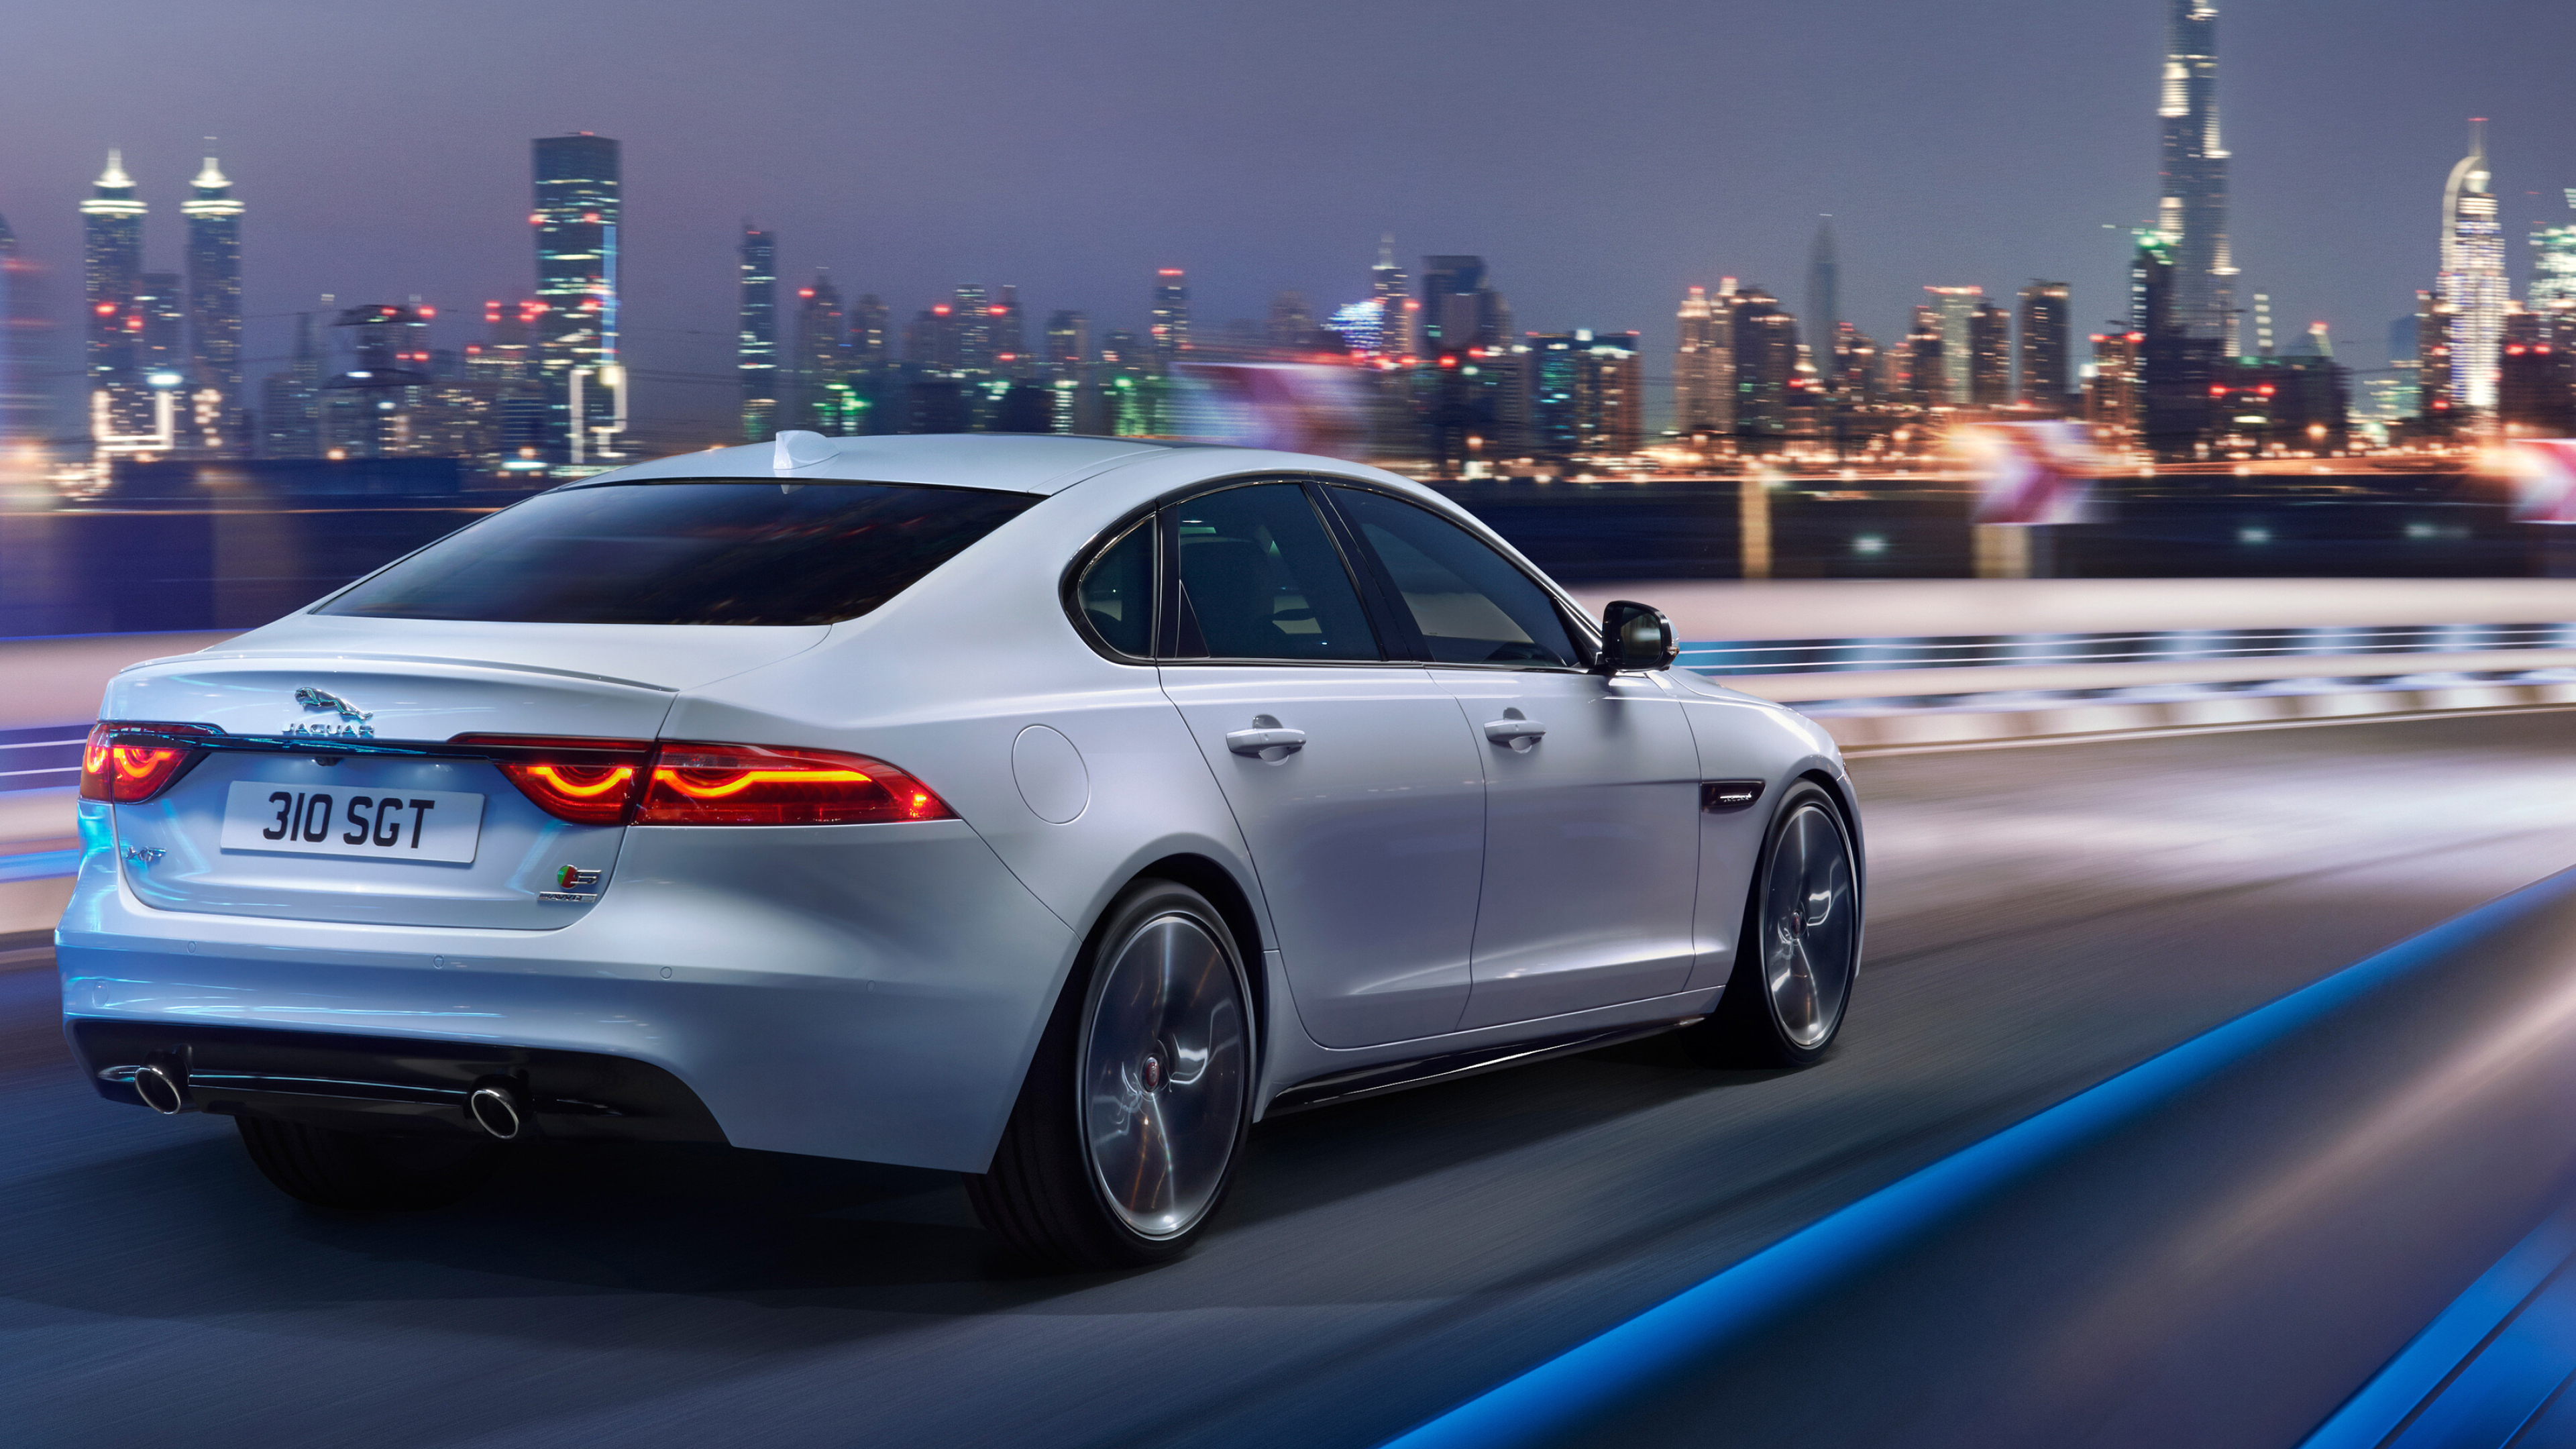 Jaguar Cars: One of the largest automotive manufacturers in the world, XF. 3840x2160 4K Wallpaper.